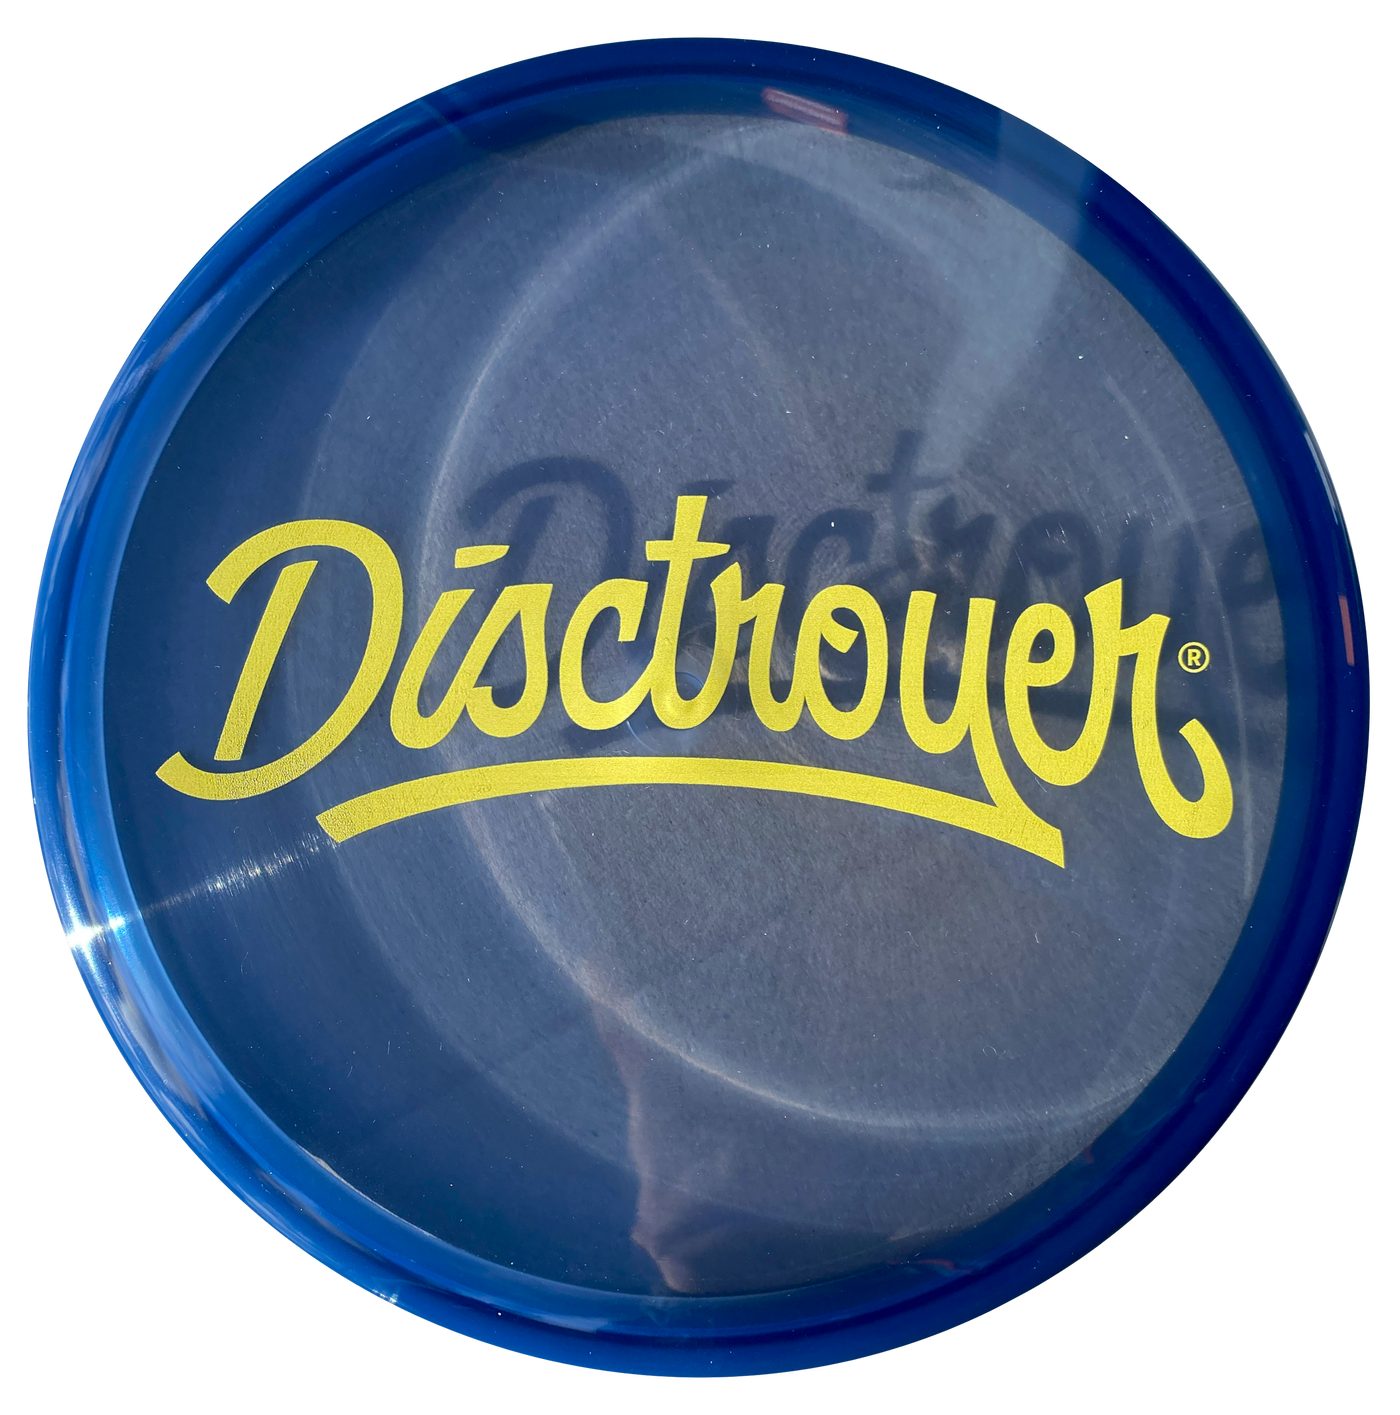 Disctroyer A-Medium Sparrow P&A-3 Putter with Disctroyer Yellow Script Stamp - Speed 3